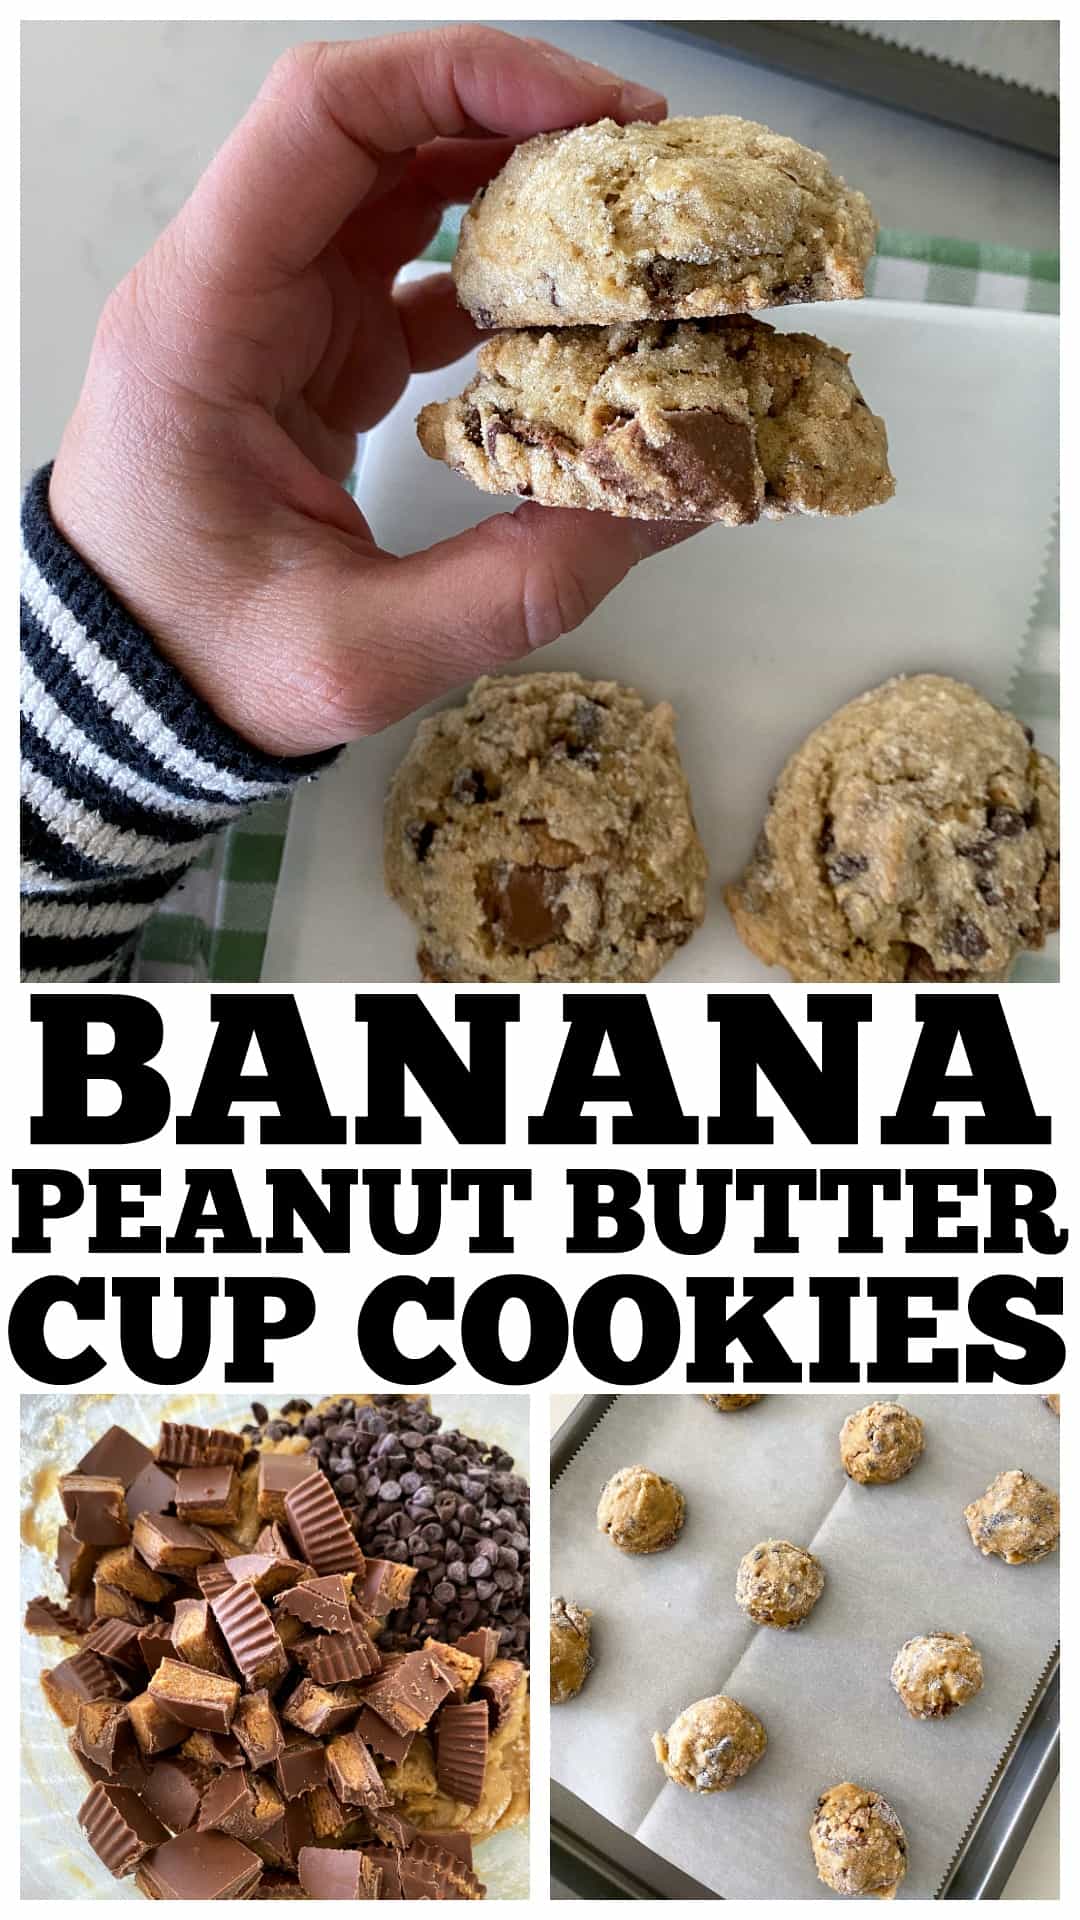 A Collage of Images of Banana Reese's Peanut Butter Cup Cookies